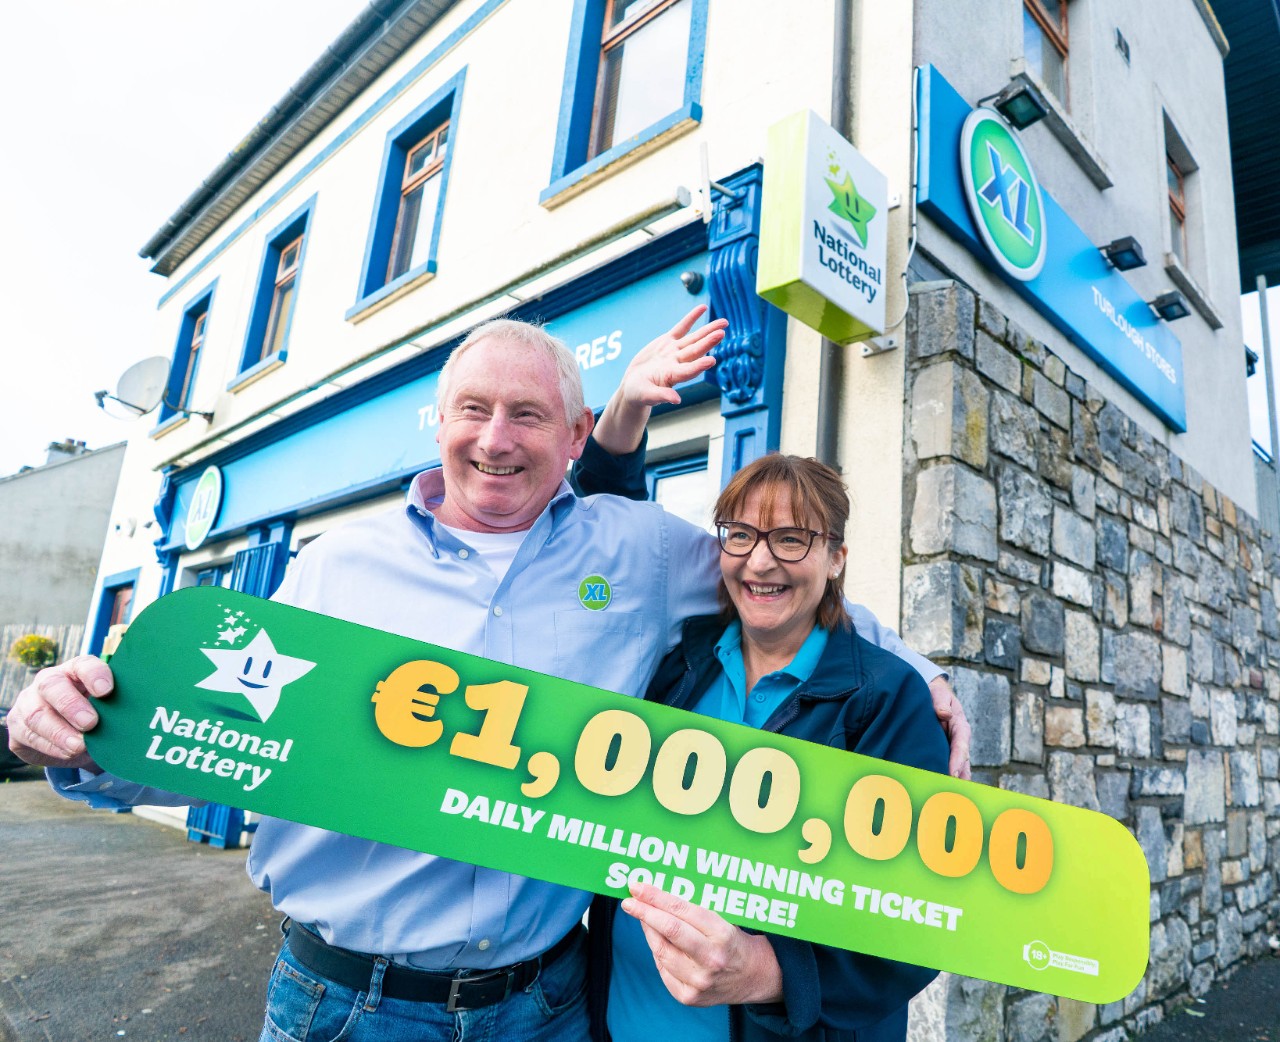 NO REPRO FEE. 4th November 2022. A small local shop in the Turlough area in Co. Mayo has been revealed as the selling location for Thursday’s (3rd October) Daily Million top prize ticket worth an amazing €1,000,000. The winning normal play ticket was sold on the day of the draw at Turlough Stores in Turlough, just outside Castlebar in Co. Mayo. Michael and Attracta Barrett pictured celebrating at the store today having sold the Daily Millions winning ticket. Pic. Keith Heneghan / Mac Innes Photography